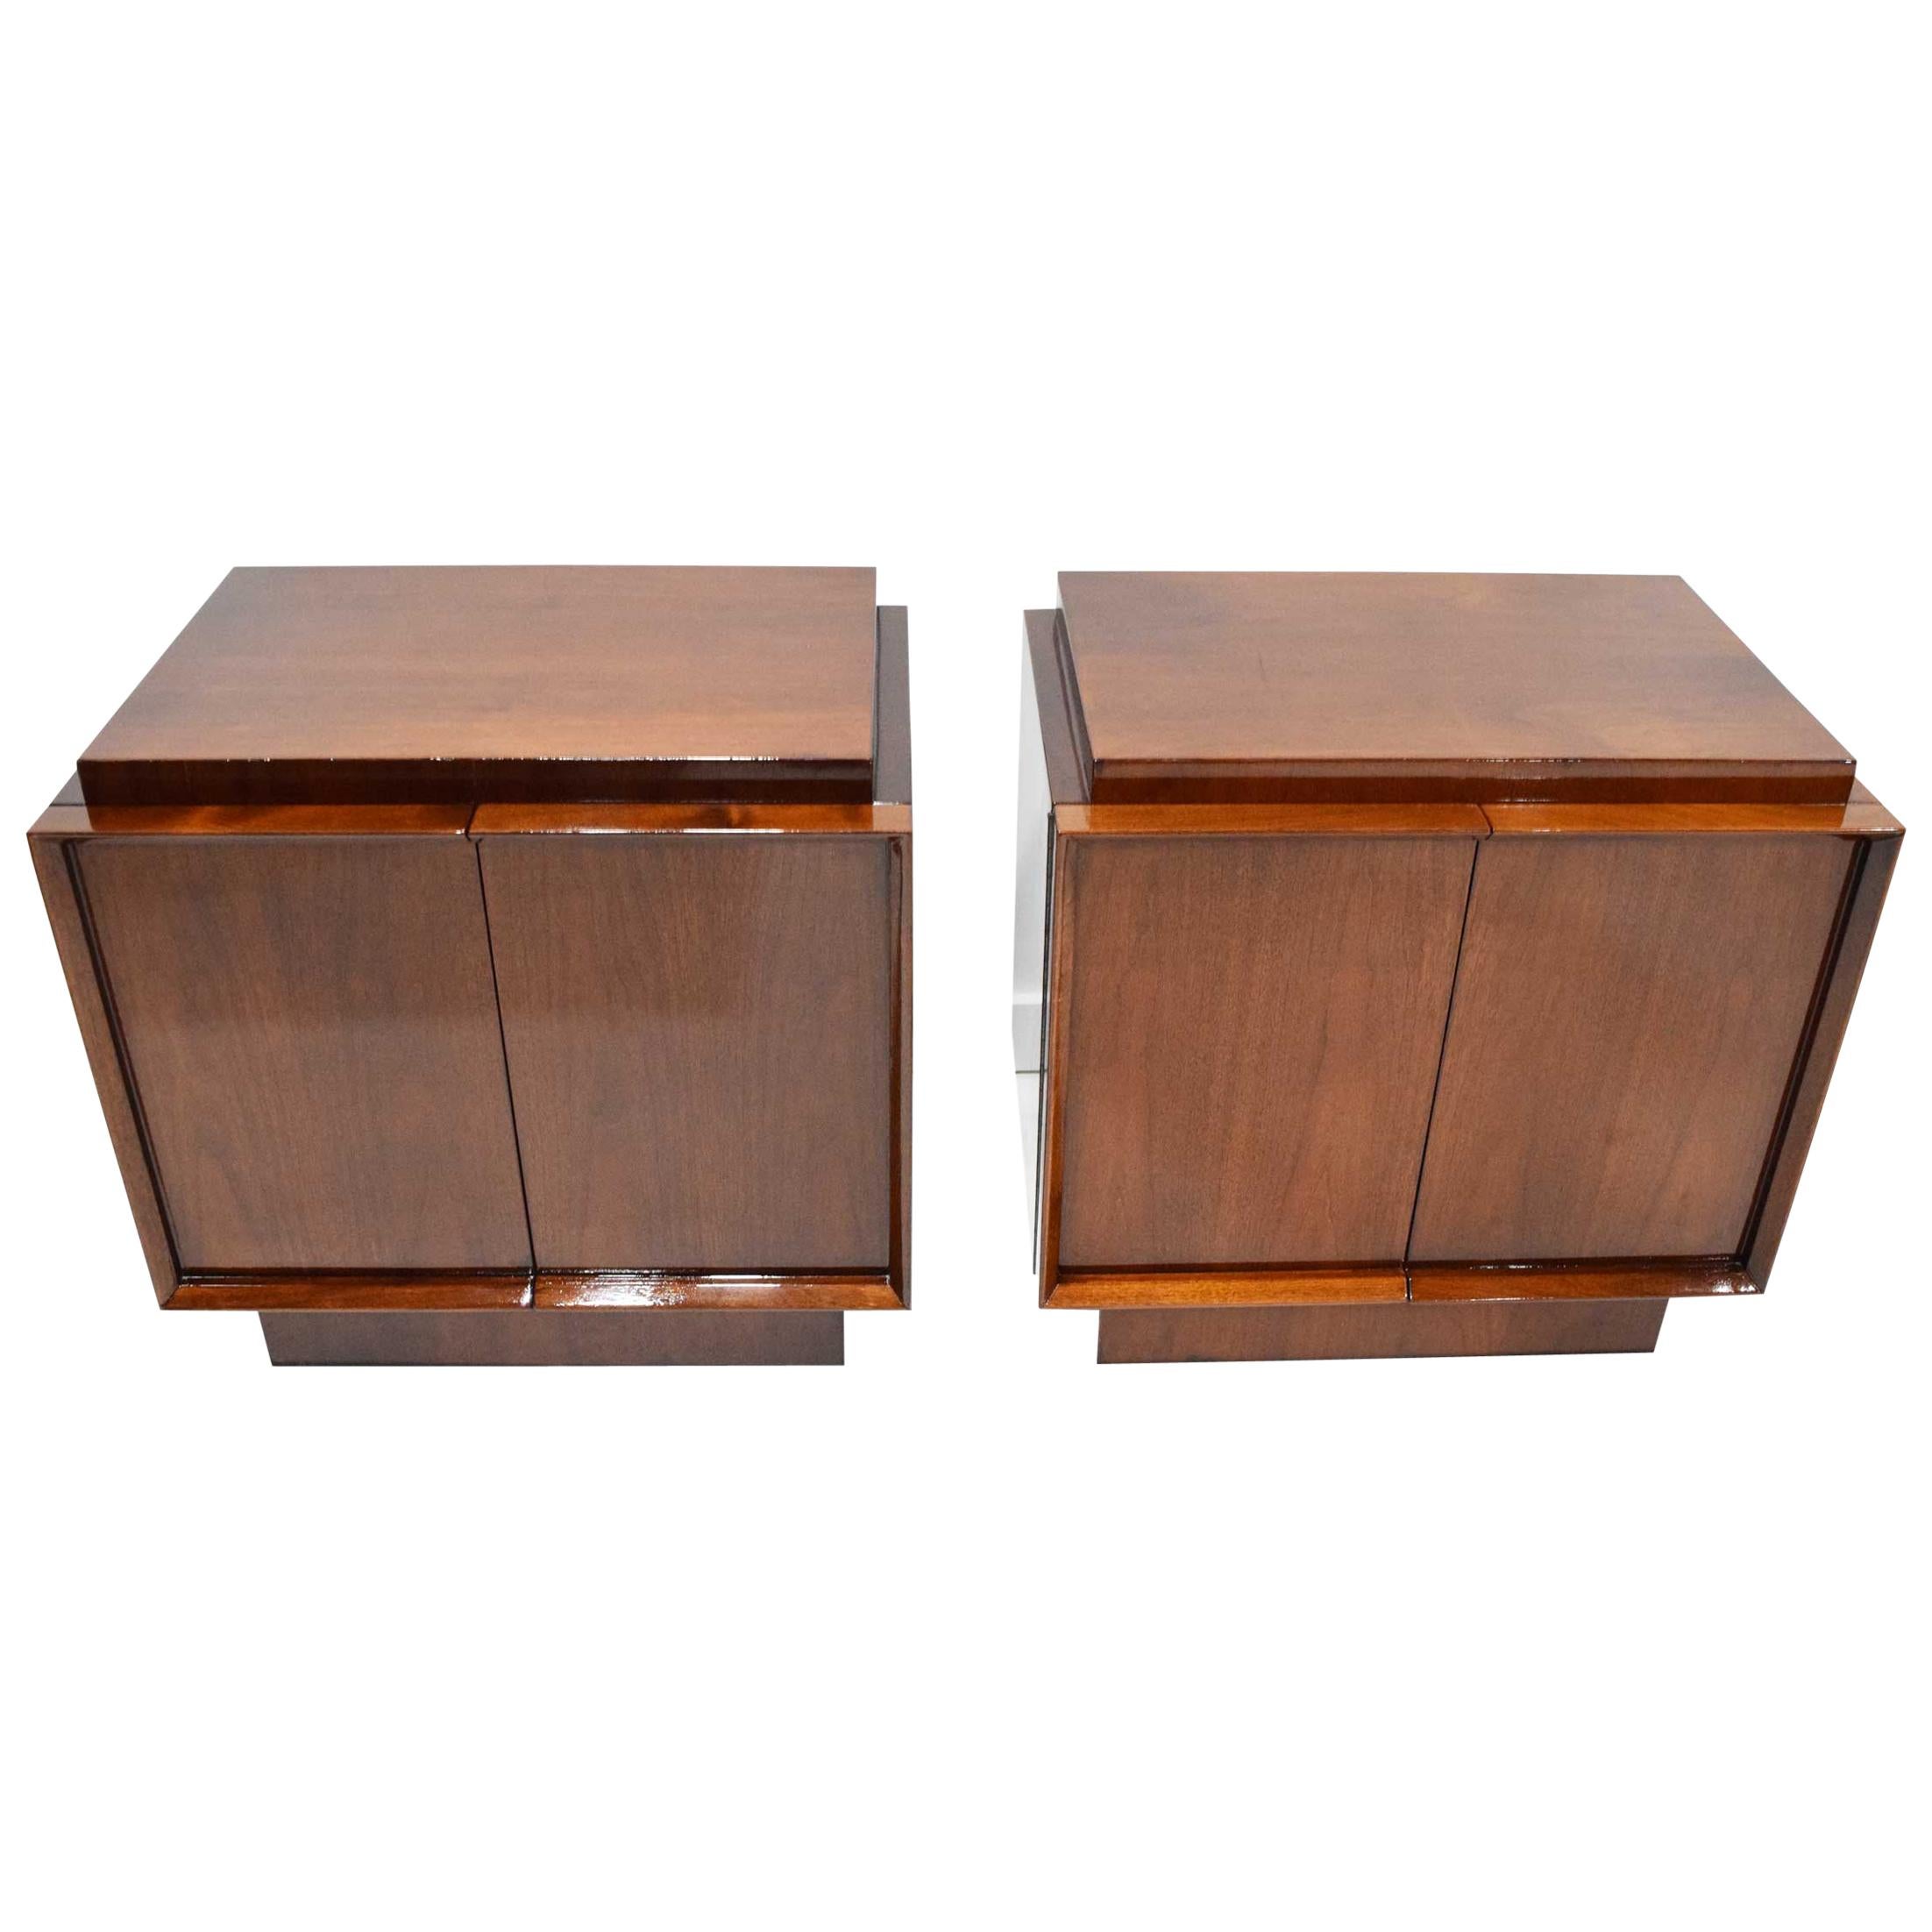 Pair of Art Deco Style Nightstands in Mahogany